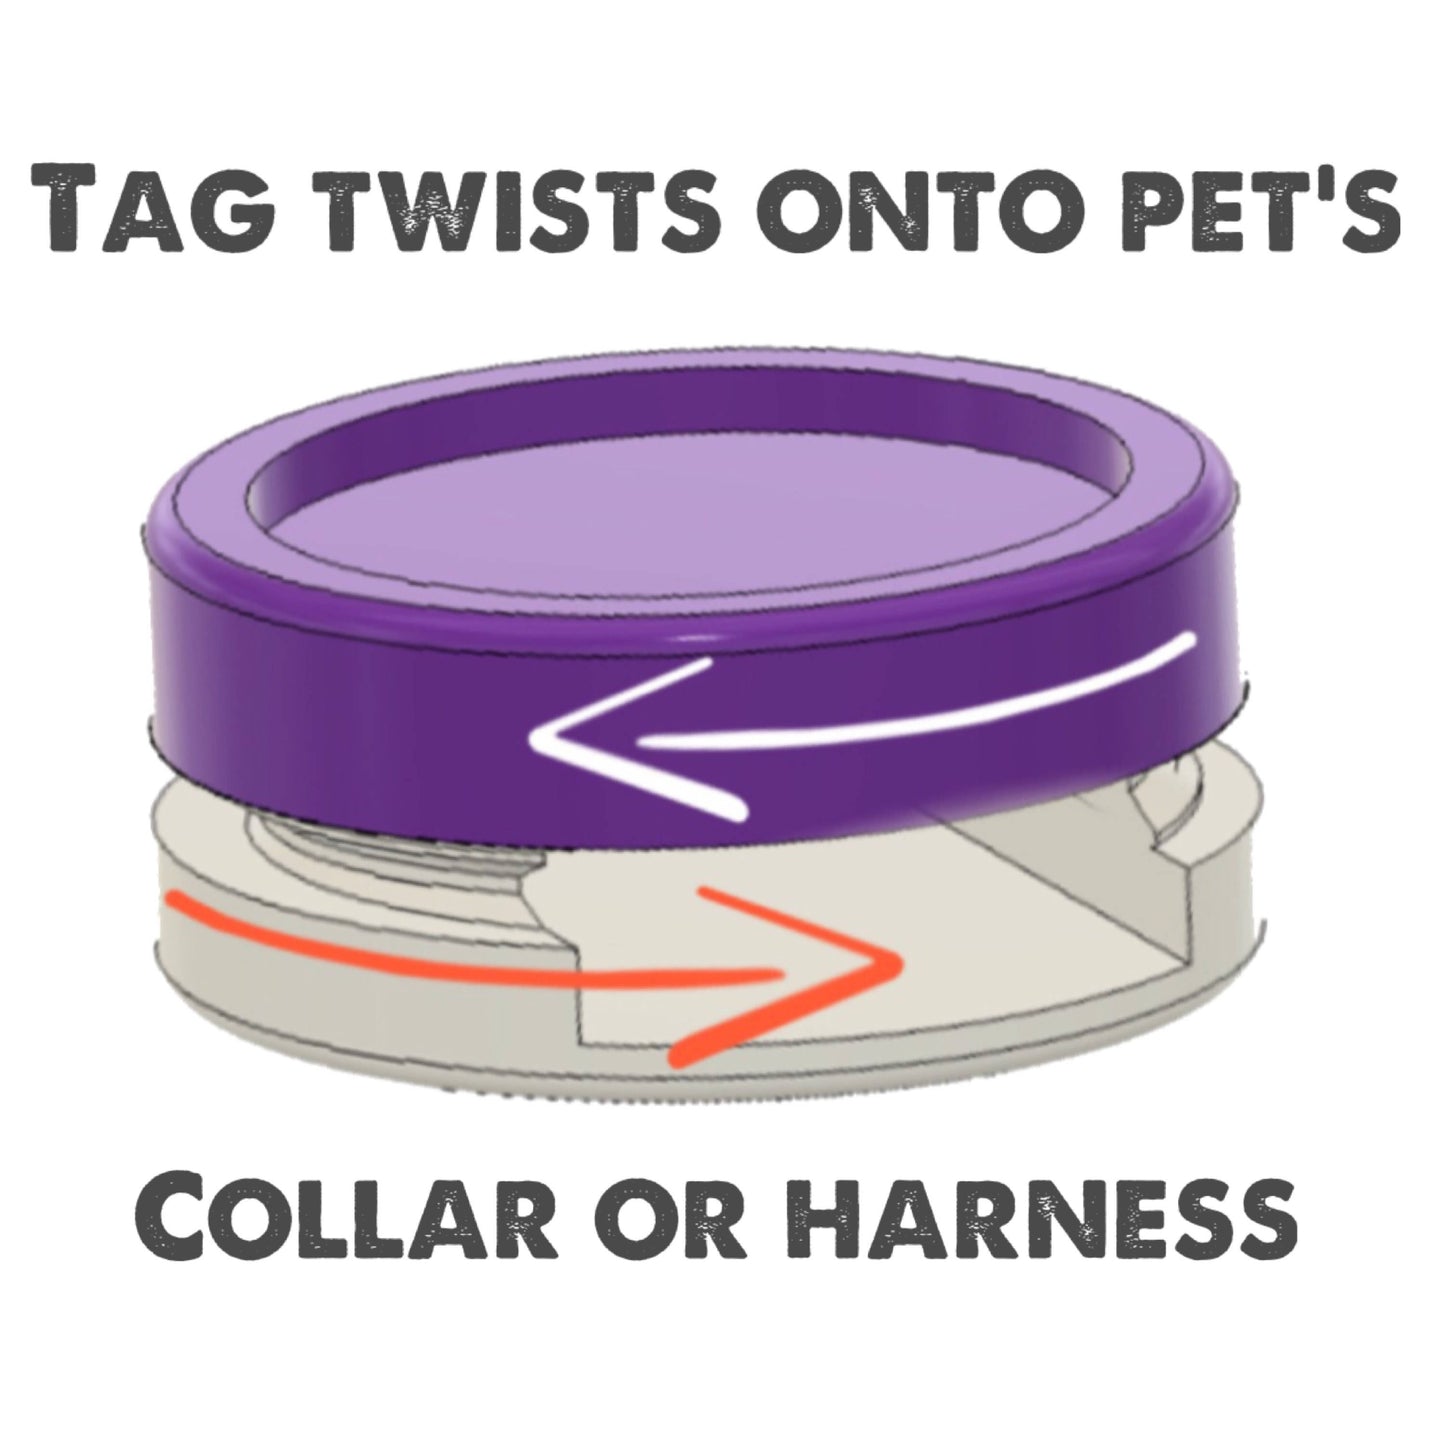 Stones Tongue Twist Tag- Silent, Eco-Friendly, Ringless ID Tag for Cats and Dogs that love the outdoors, mick, Keith, jagger